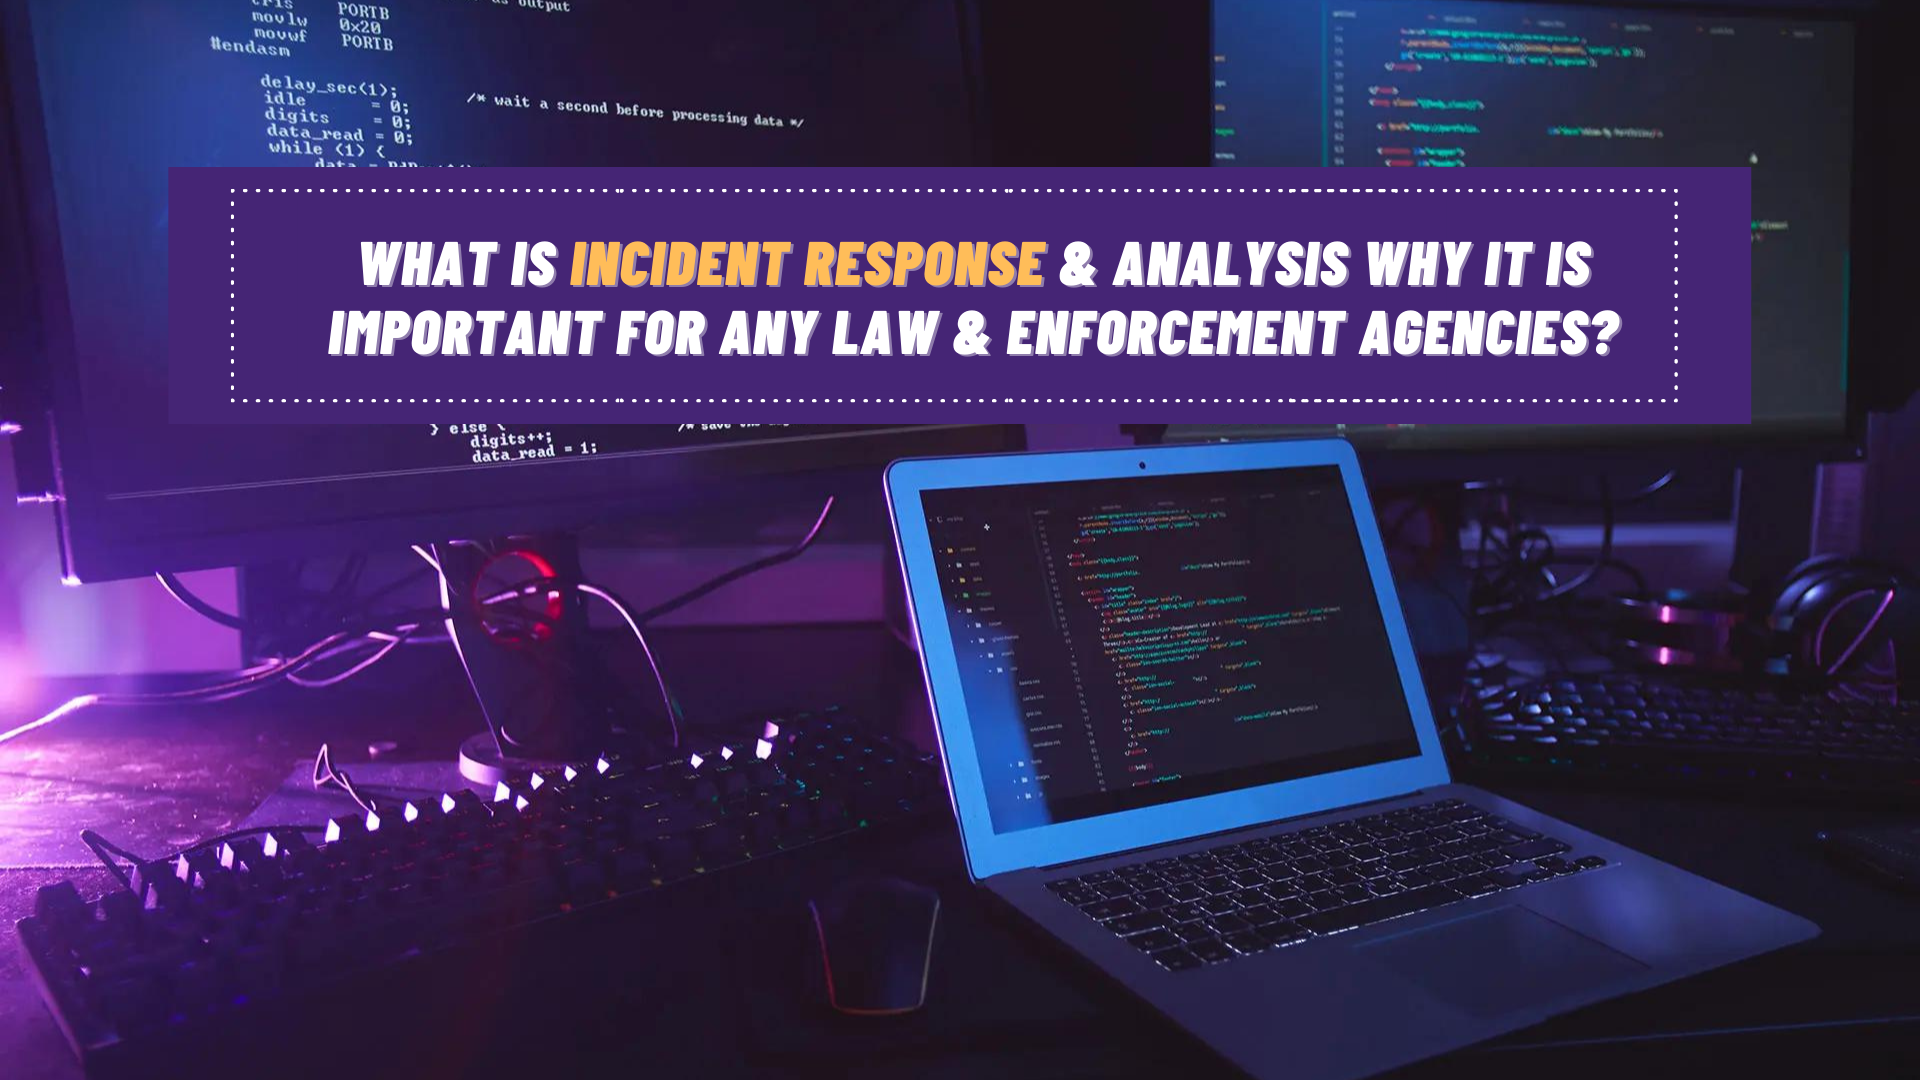 What Is Incident Response & Analysis? Why It Is Important For Any Law & Enforcement Agencies?